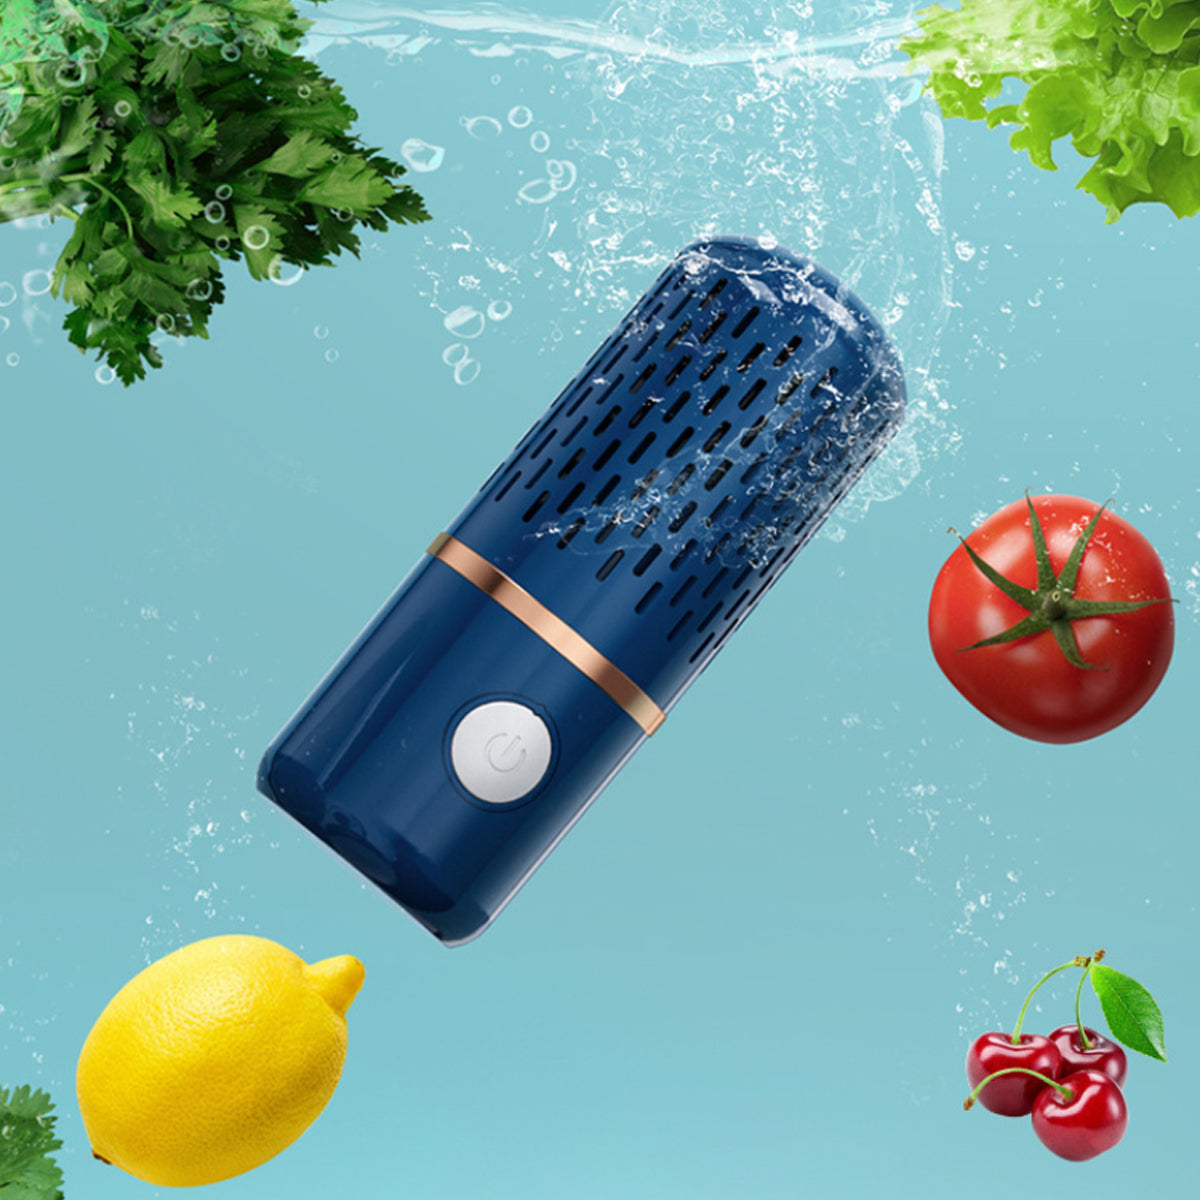 PureTech Ultrasonic Fruits And Veggie Cleaner by VistaShops